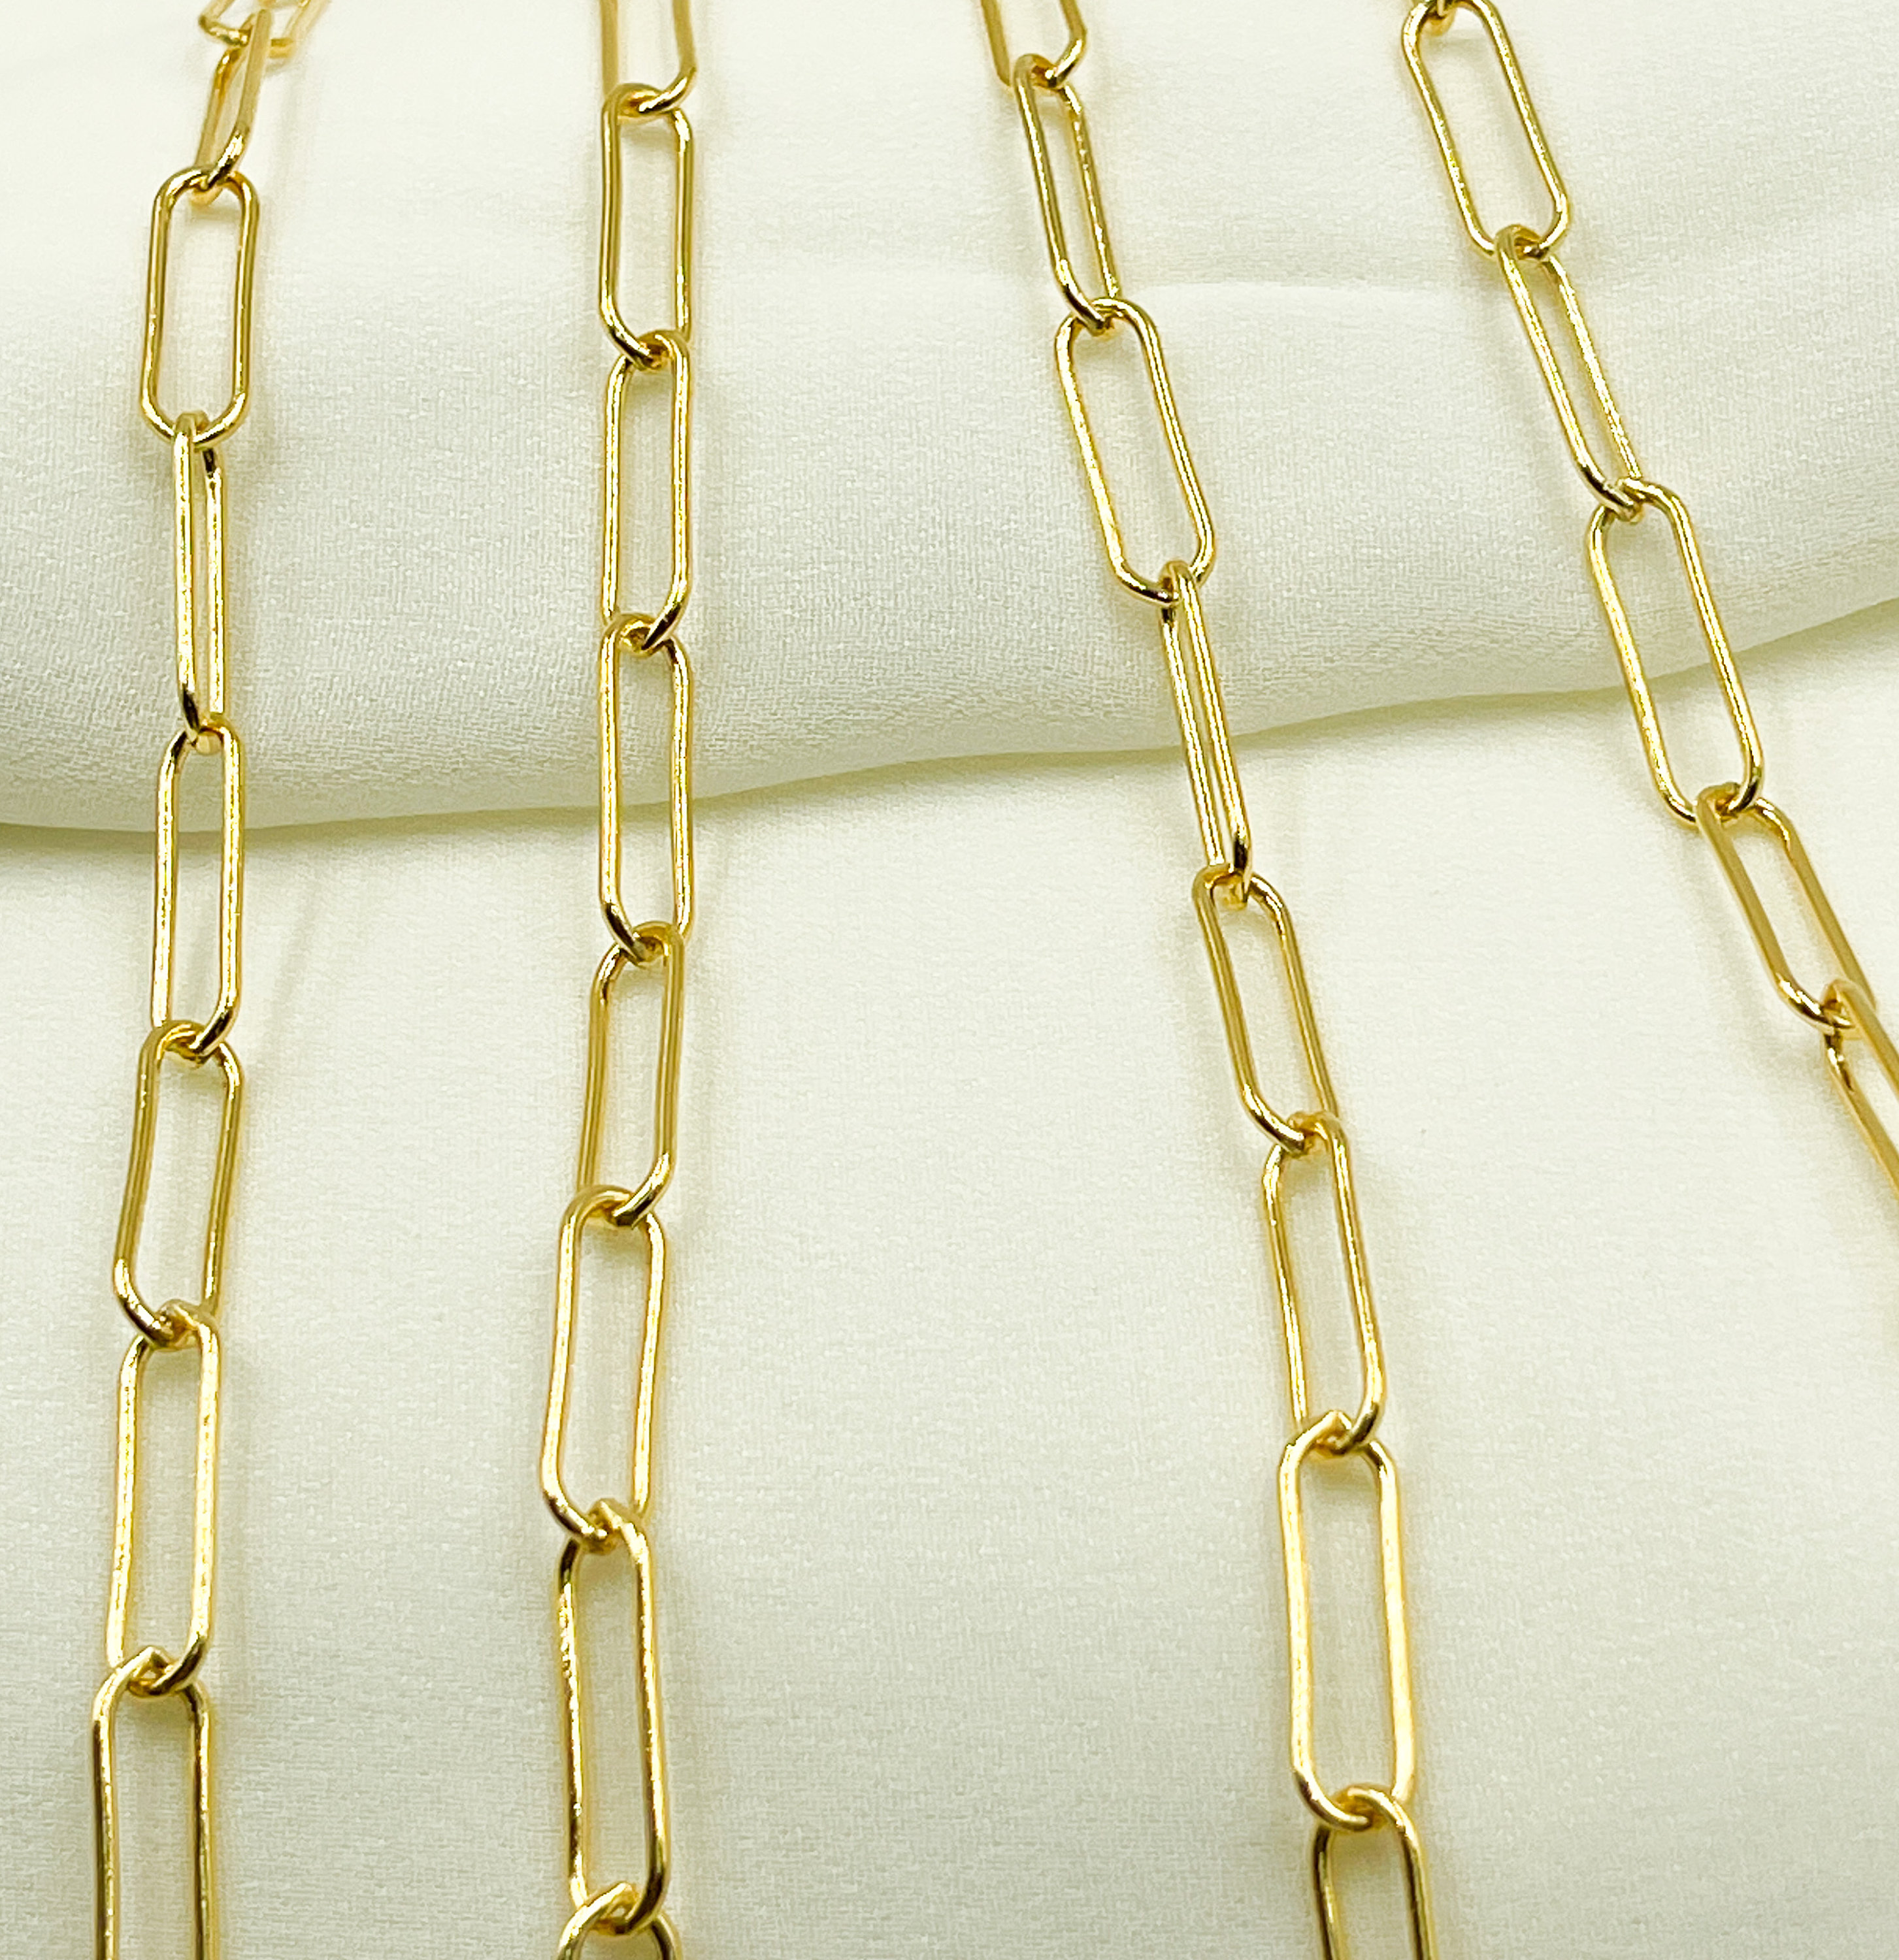 1FT 1.3mm 14k Gold Filled Chain by Foot, Unfinished Rope Chain